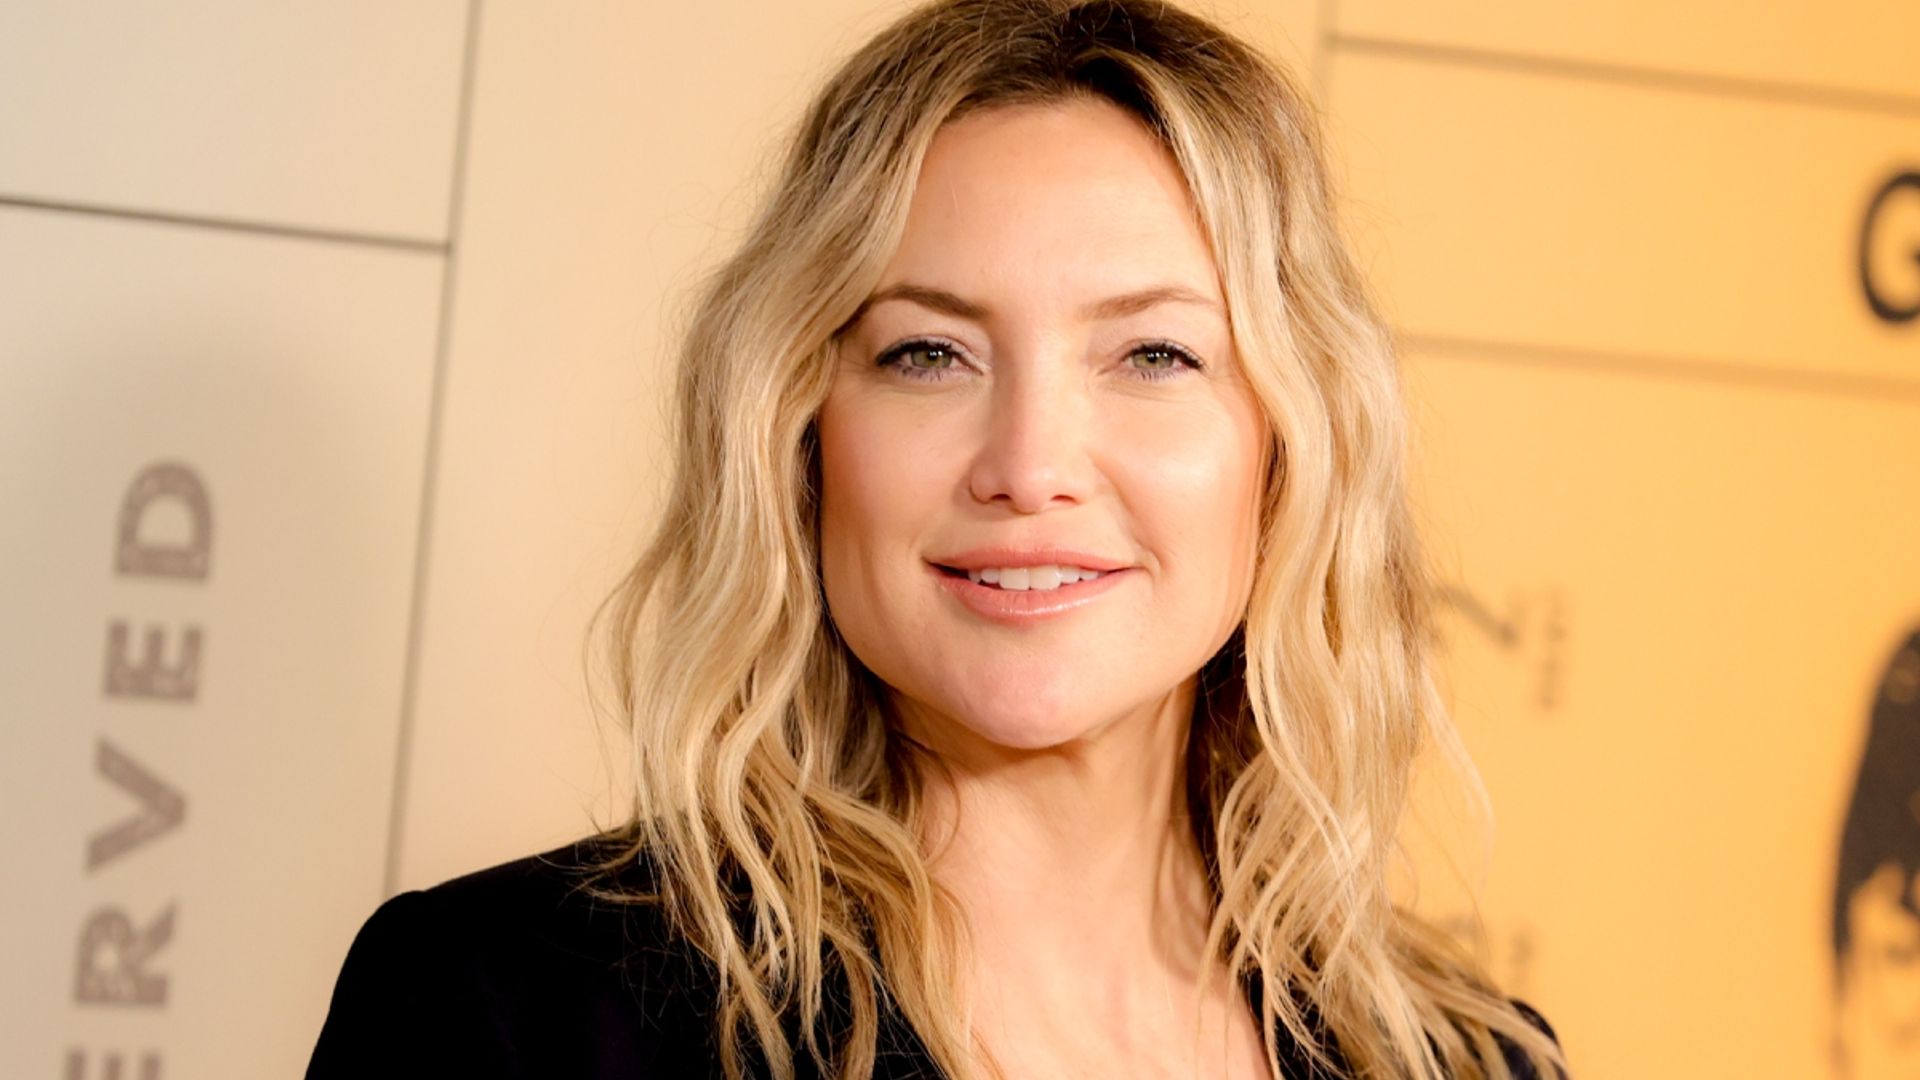 Kate Hudson's hair transformation turns heads in latest photograph